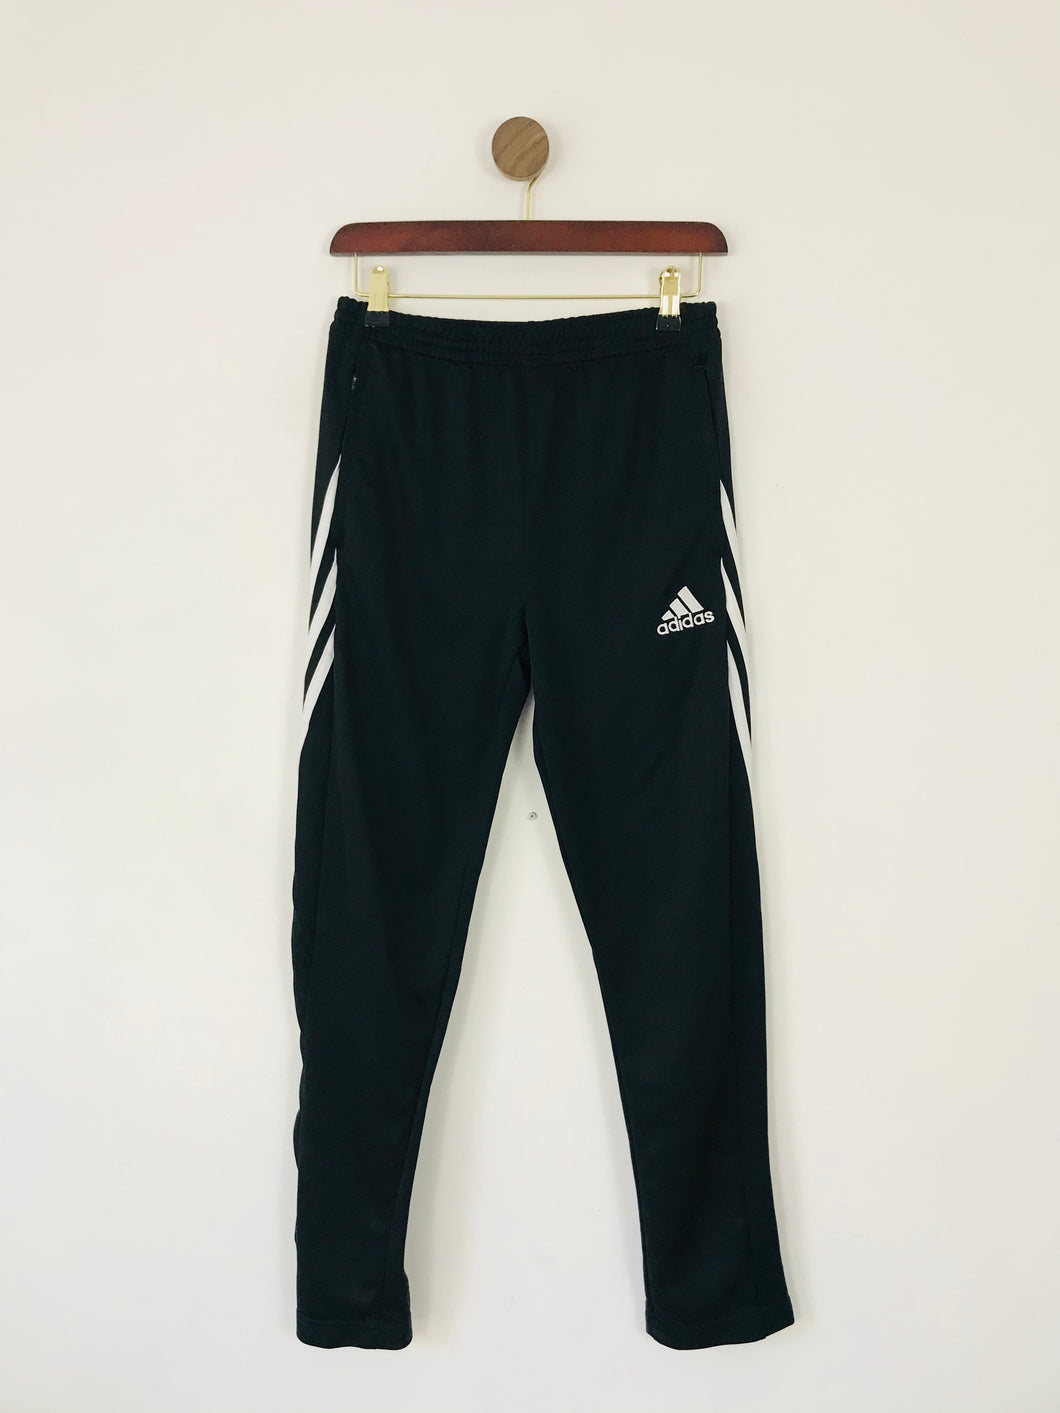 Adidas Youth Joggers Tracksuit Bottoms | YXL 13-14Y | Black